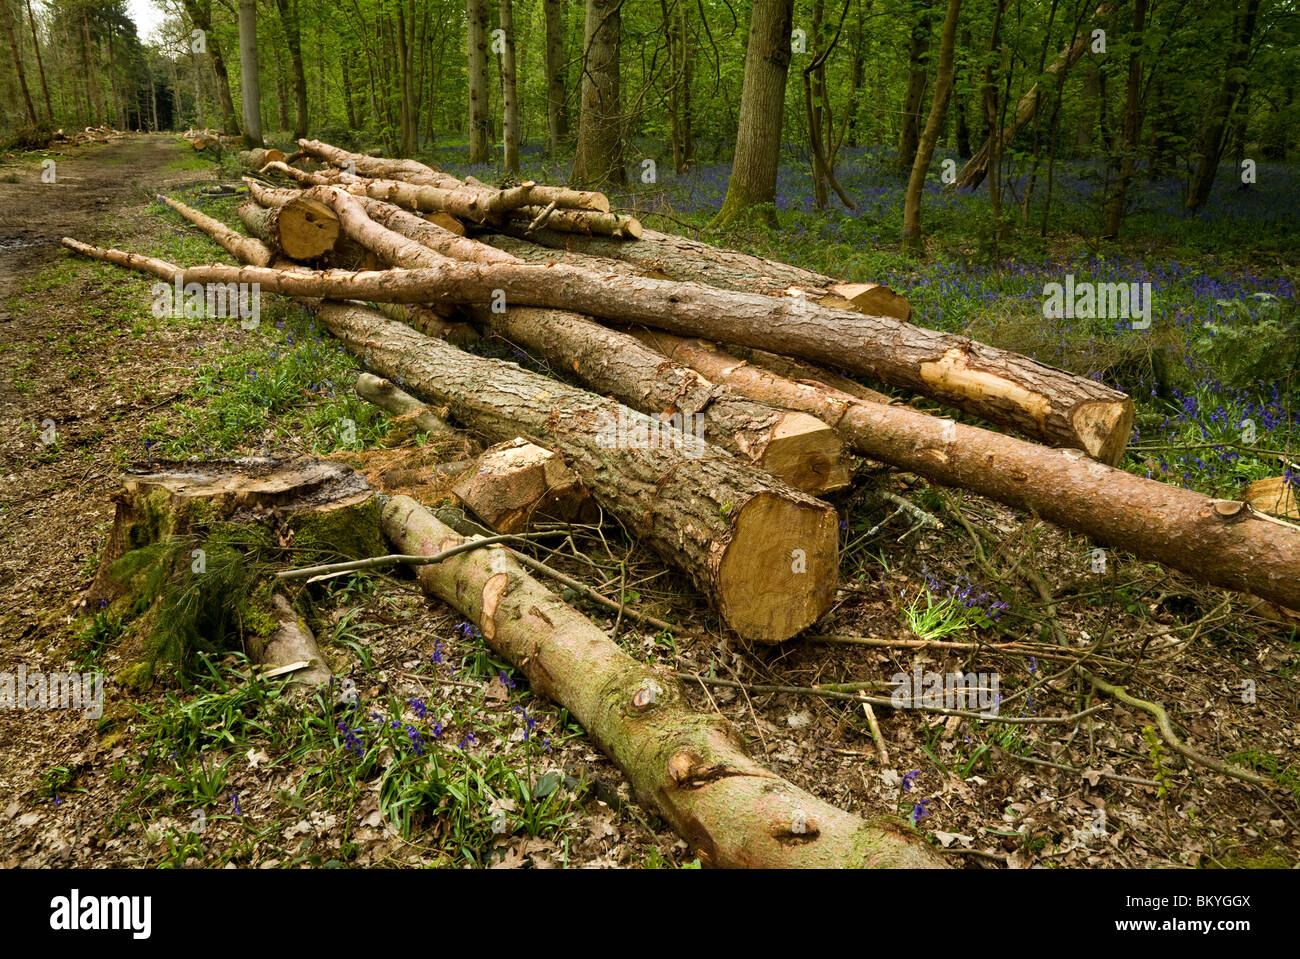 Forest and woodland management by the National Trust at Blickling in Norfolk, UK. Stock Photo